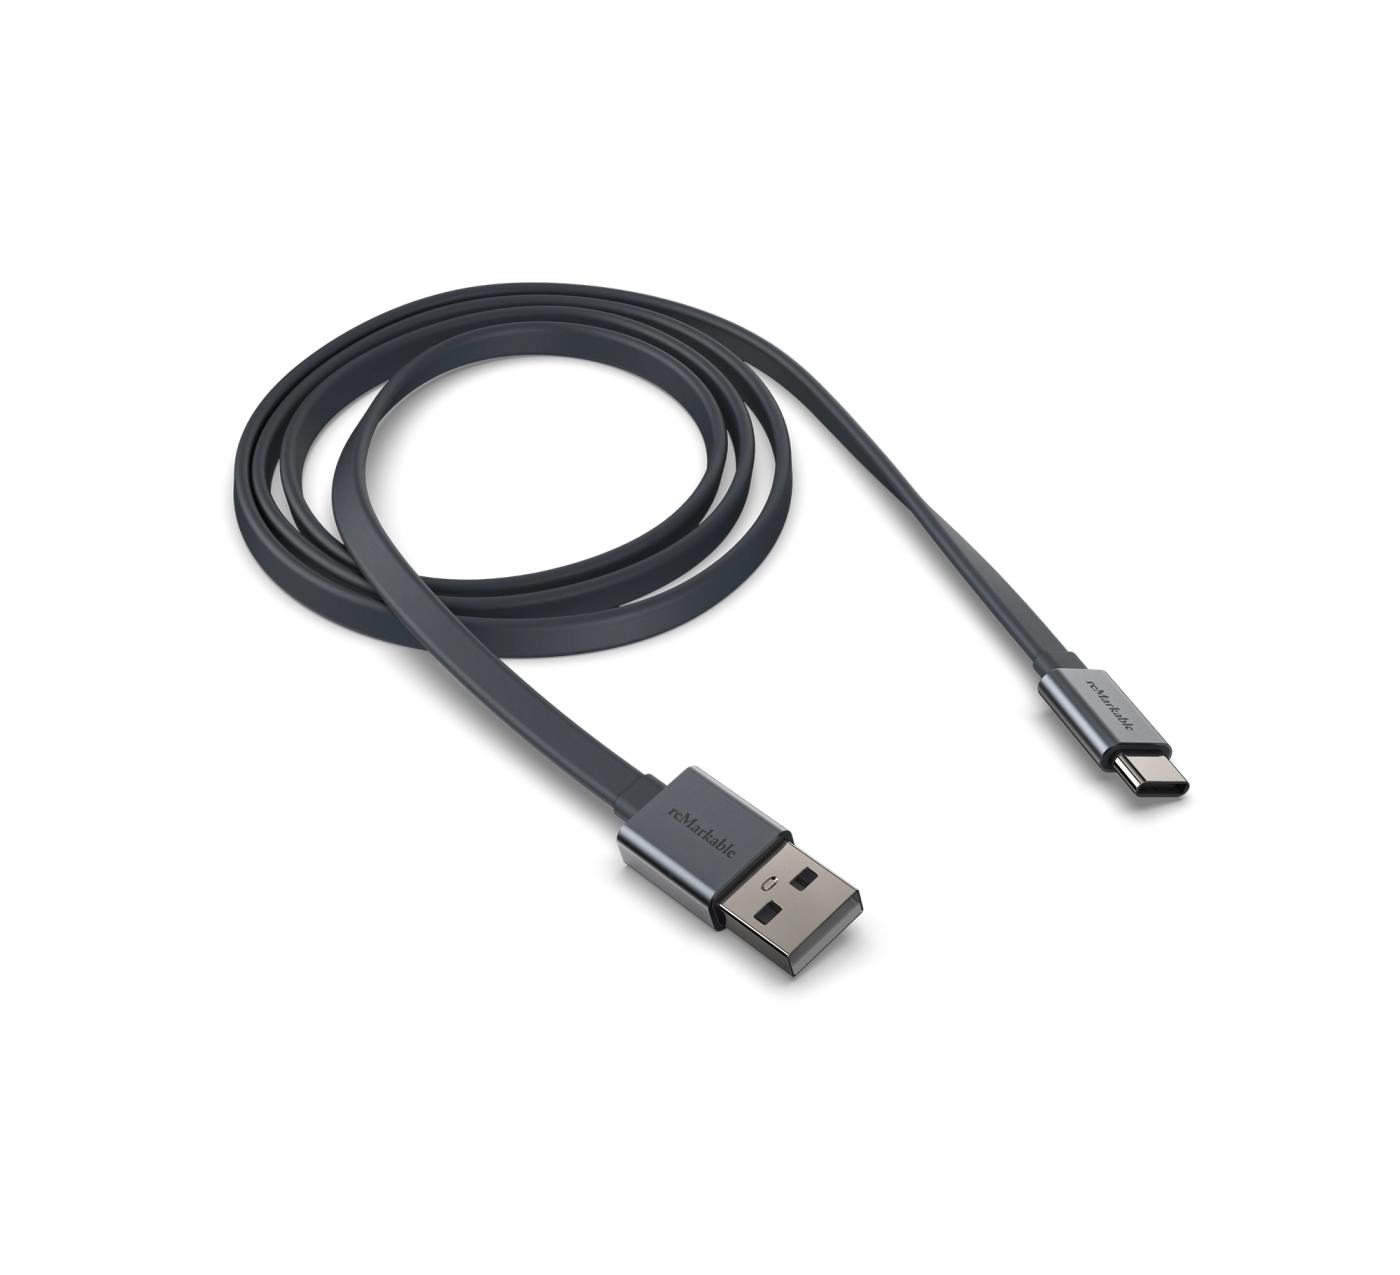 USB-C to USB-A cable for reMarkable 2